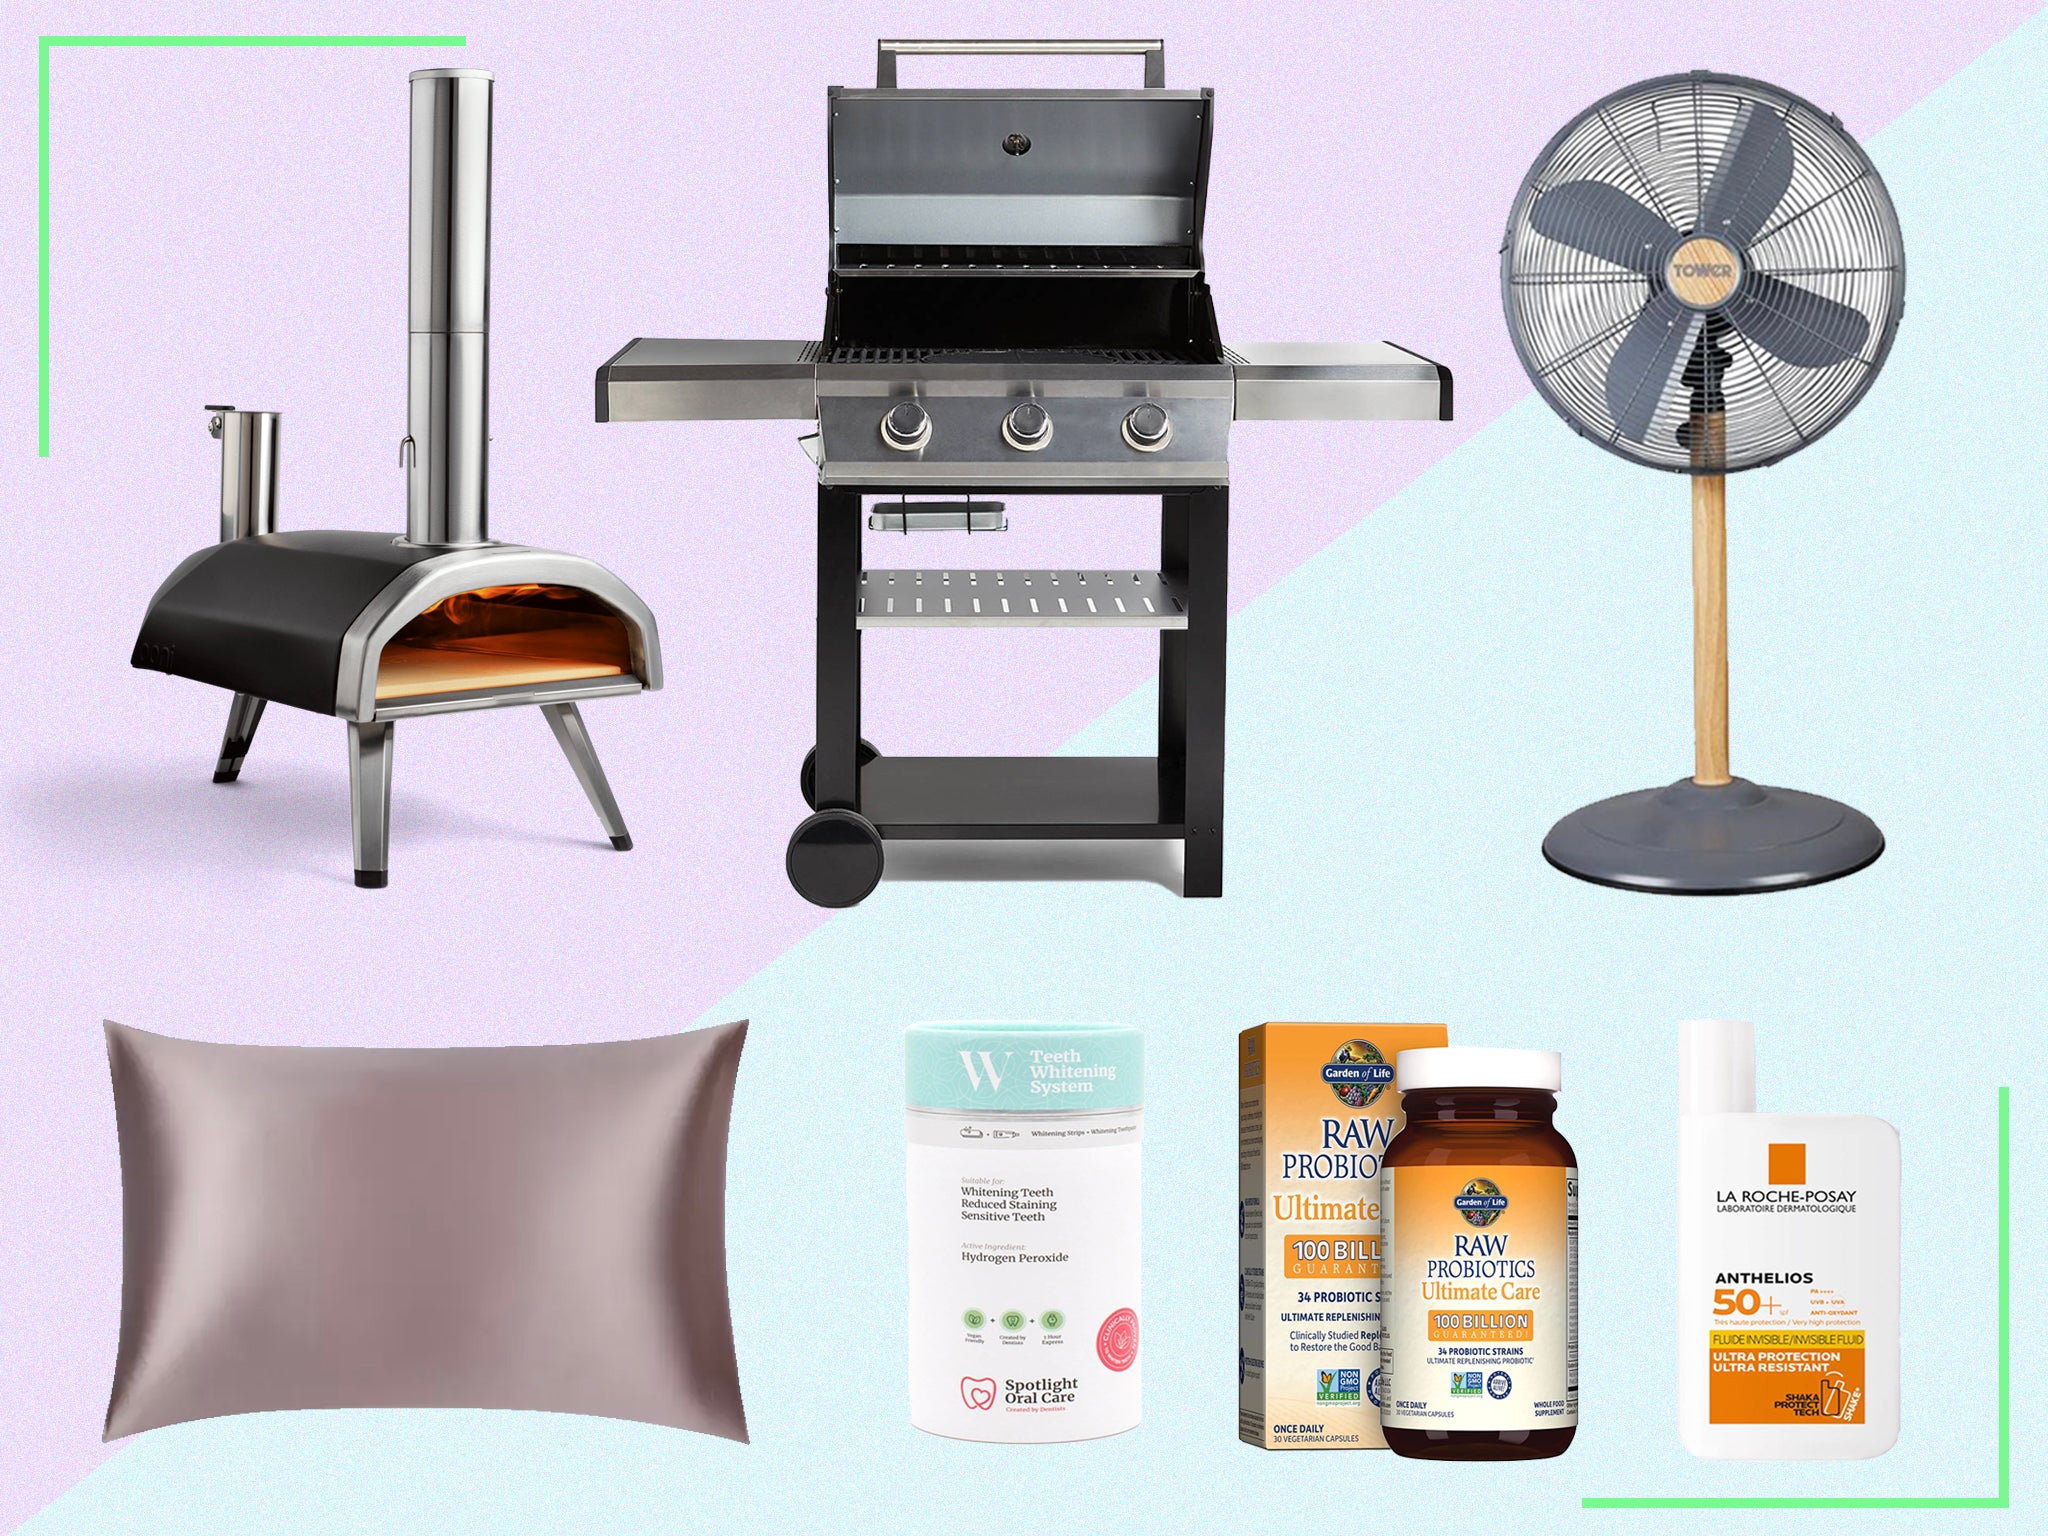 From fans to gas barbecues, these were the big hitters from the past month